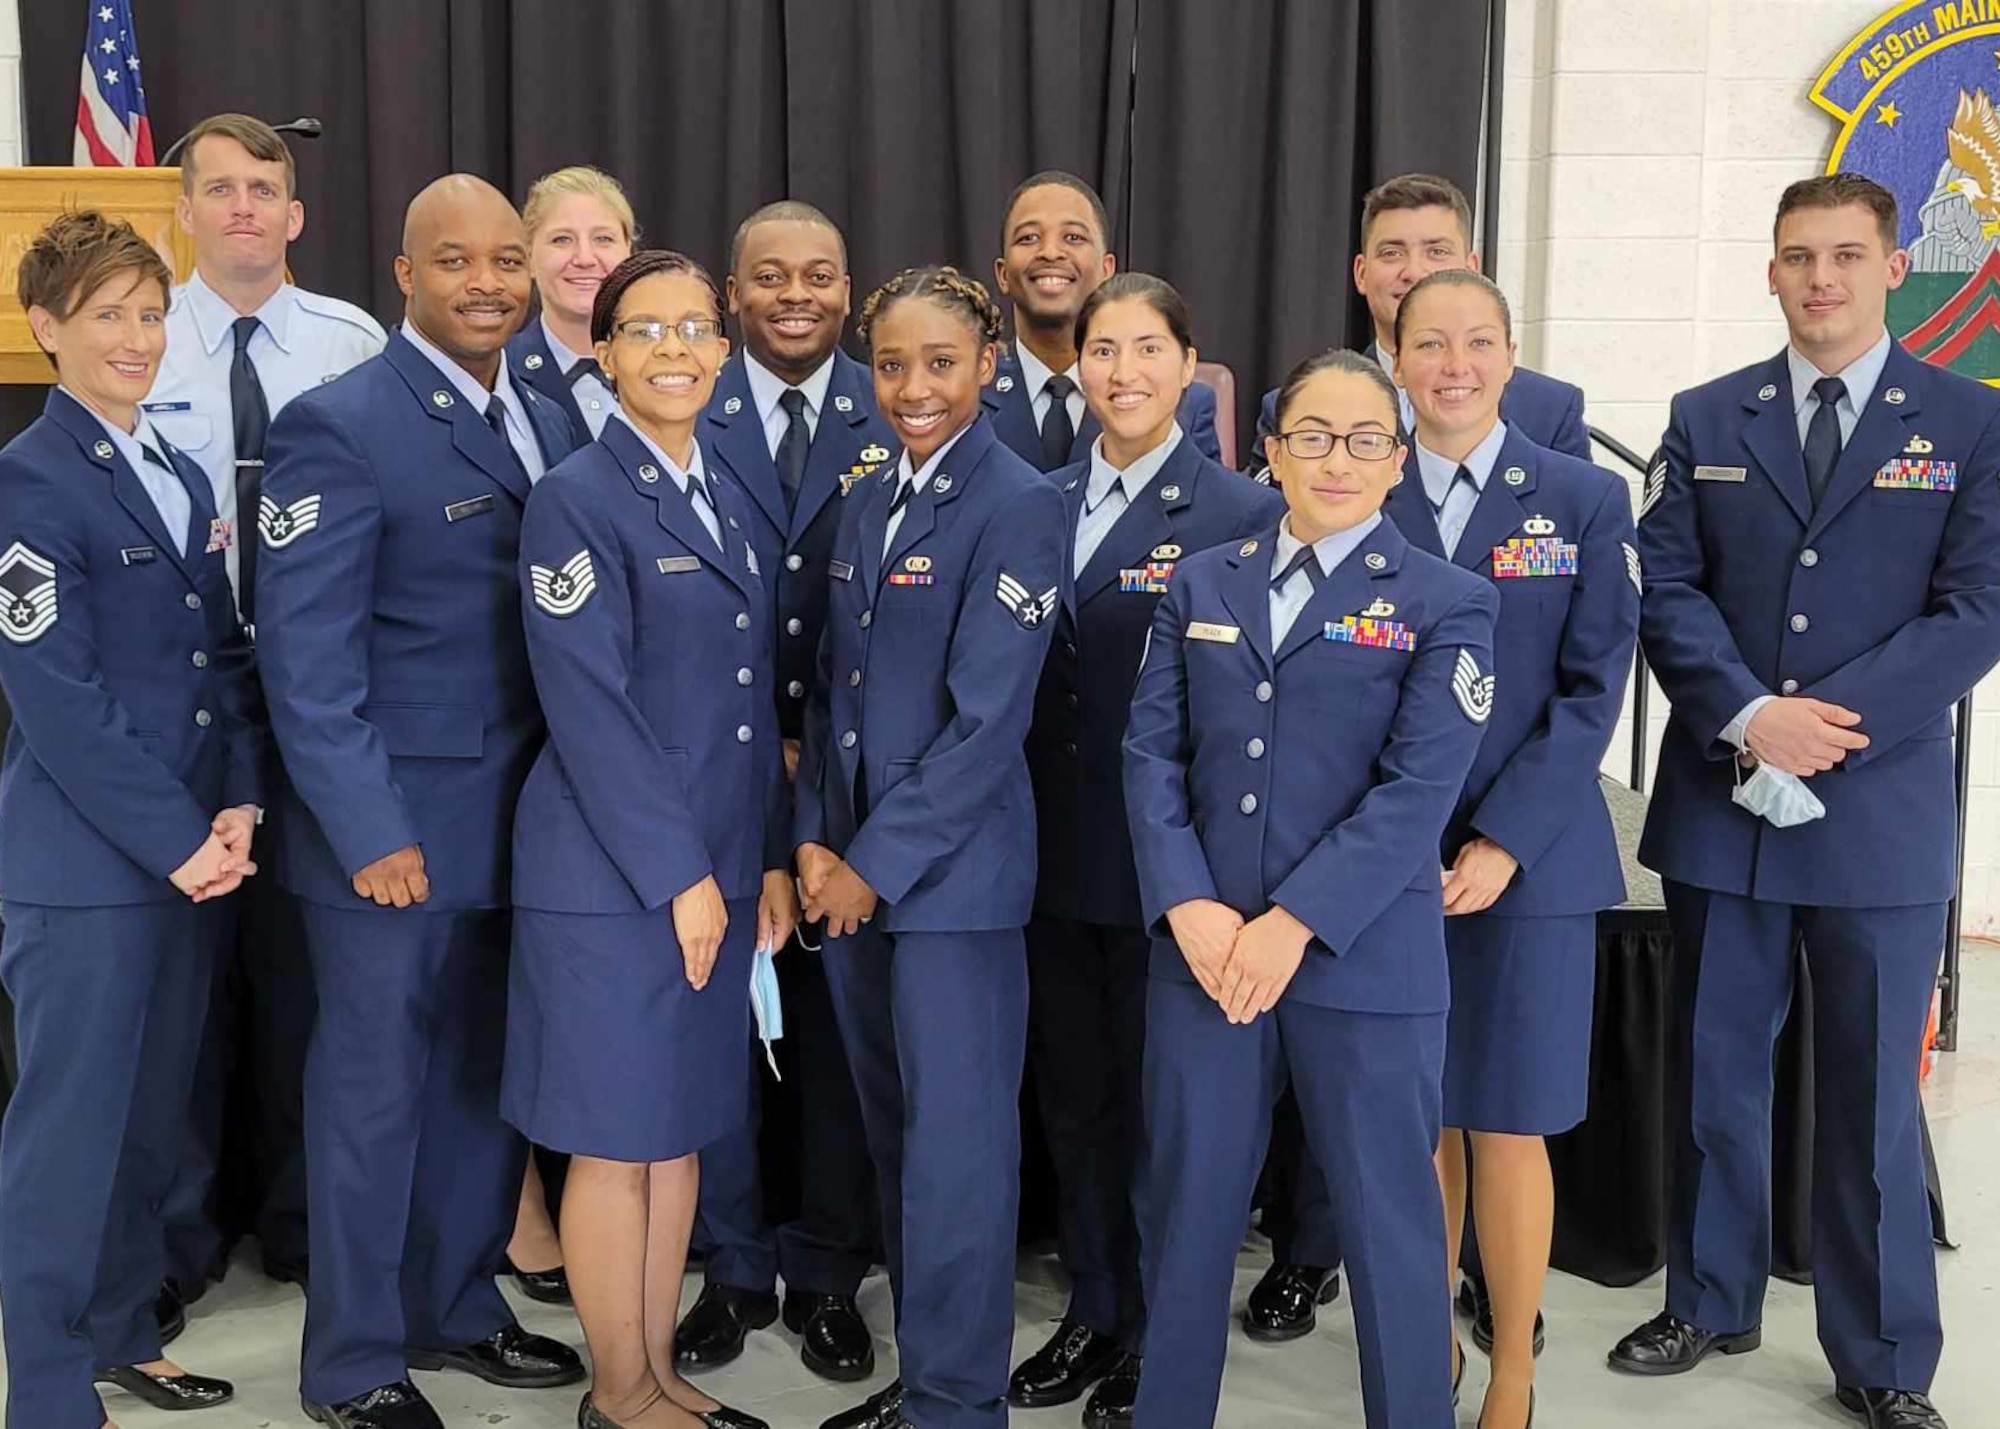 Members of the 459th Aircrew Flight Equipment shop pose for a photo Sept. 13, 2020 at Joint Base Andrews, Md. The team recently won Air Force Reserve Command’s FY20 AFE Small Program of the Year for their hard work and dedication to the 459th mission. (Courtesy Photo)